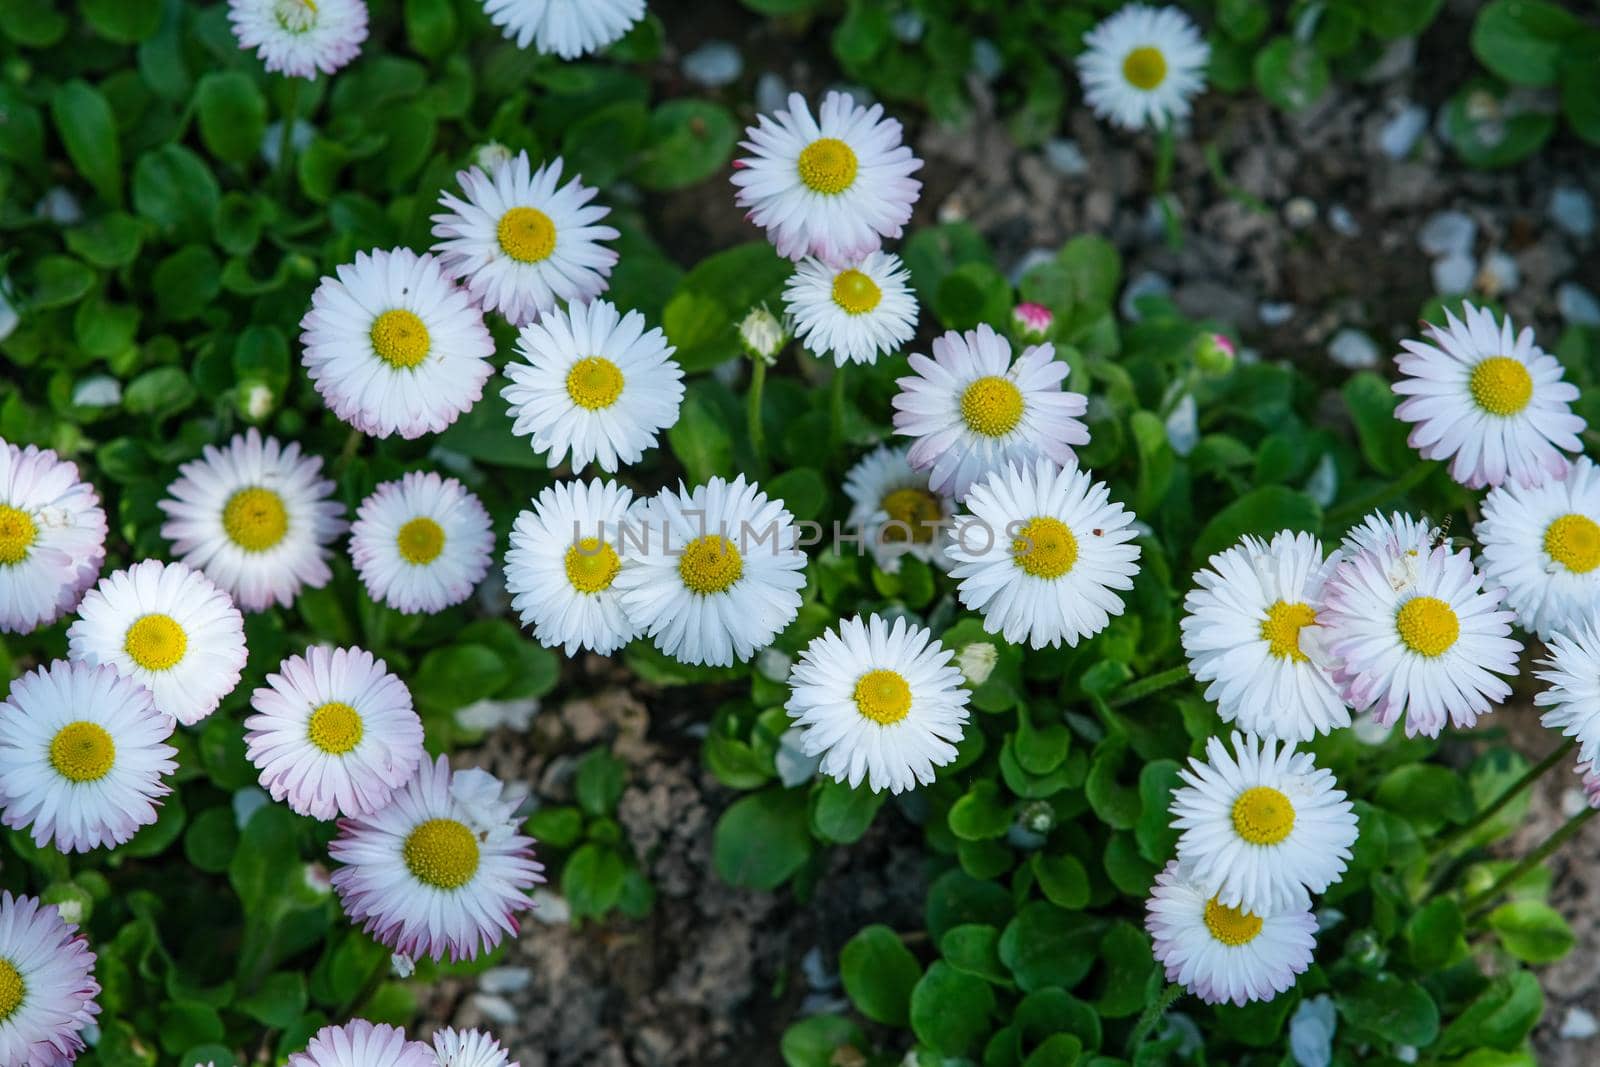 Pink daisies in the home garden. Spring daisies.